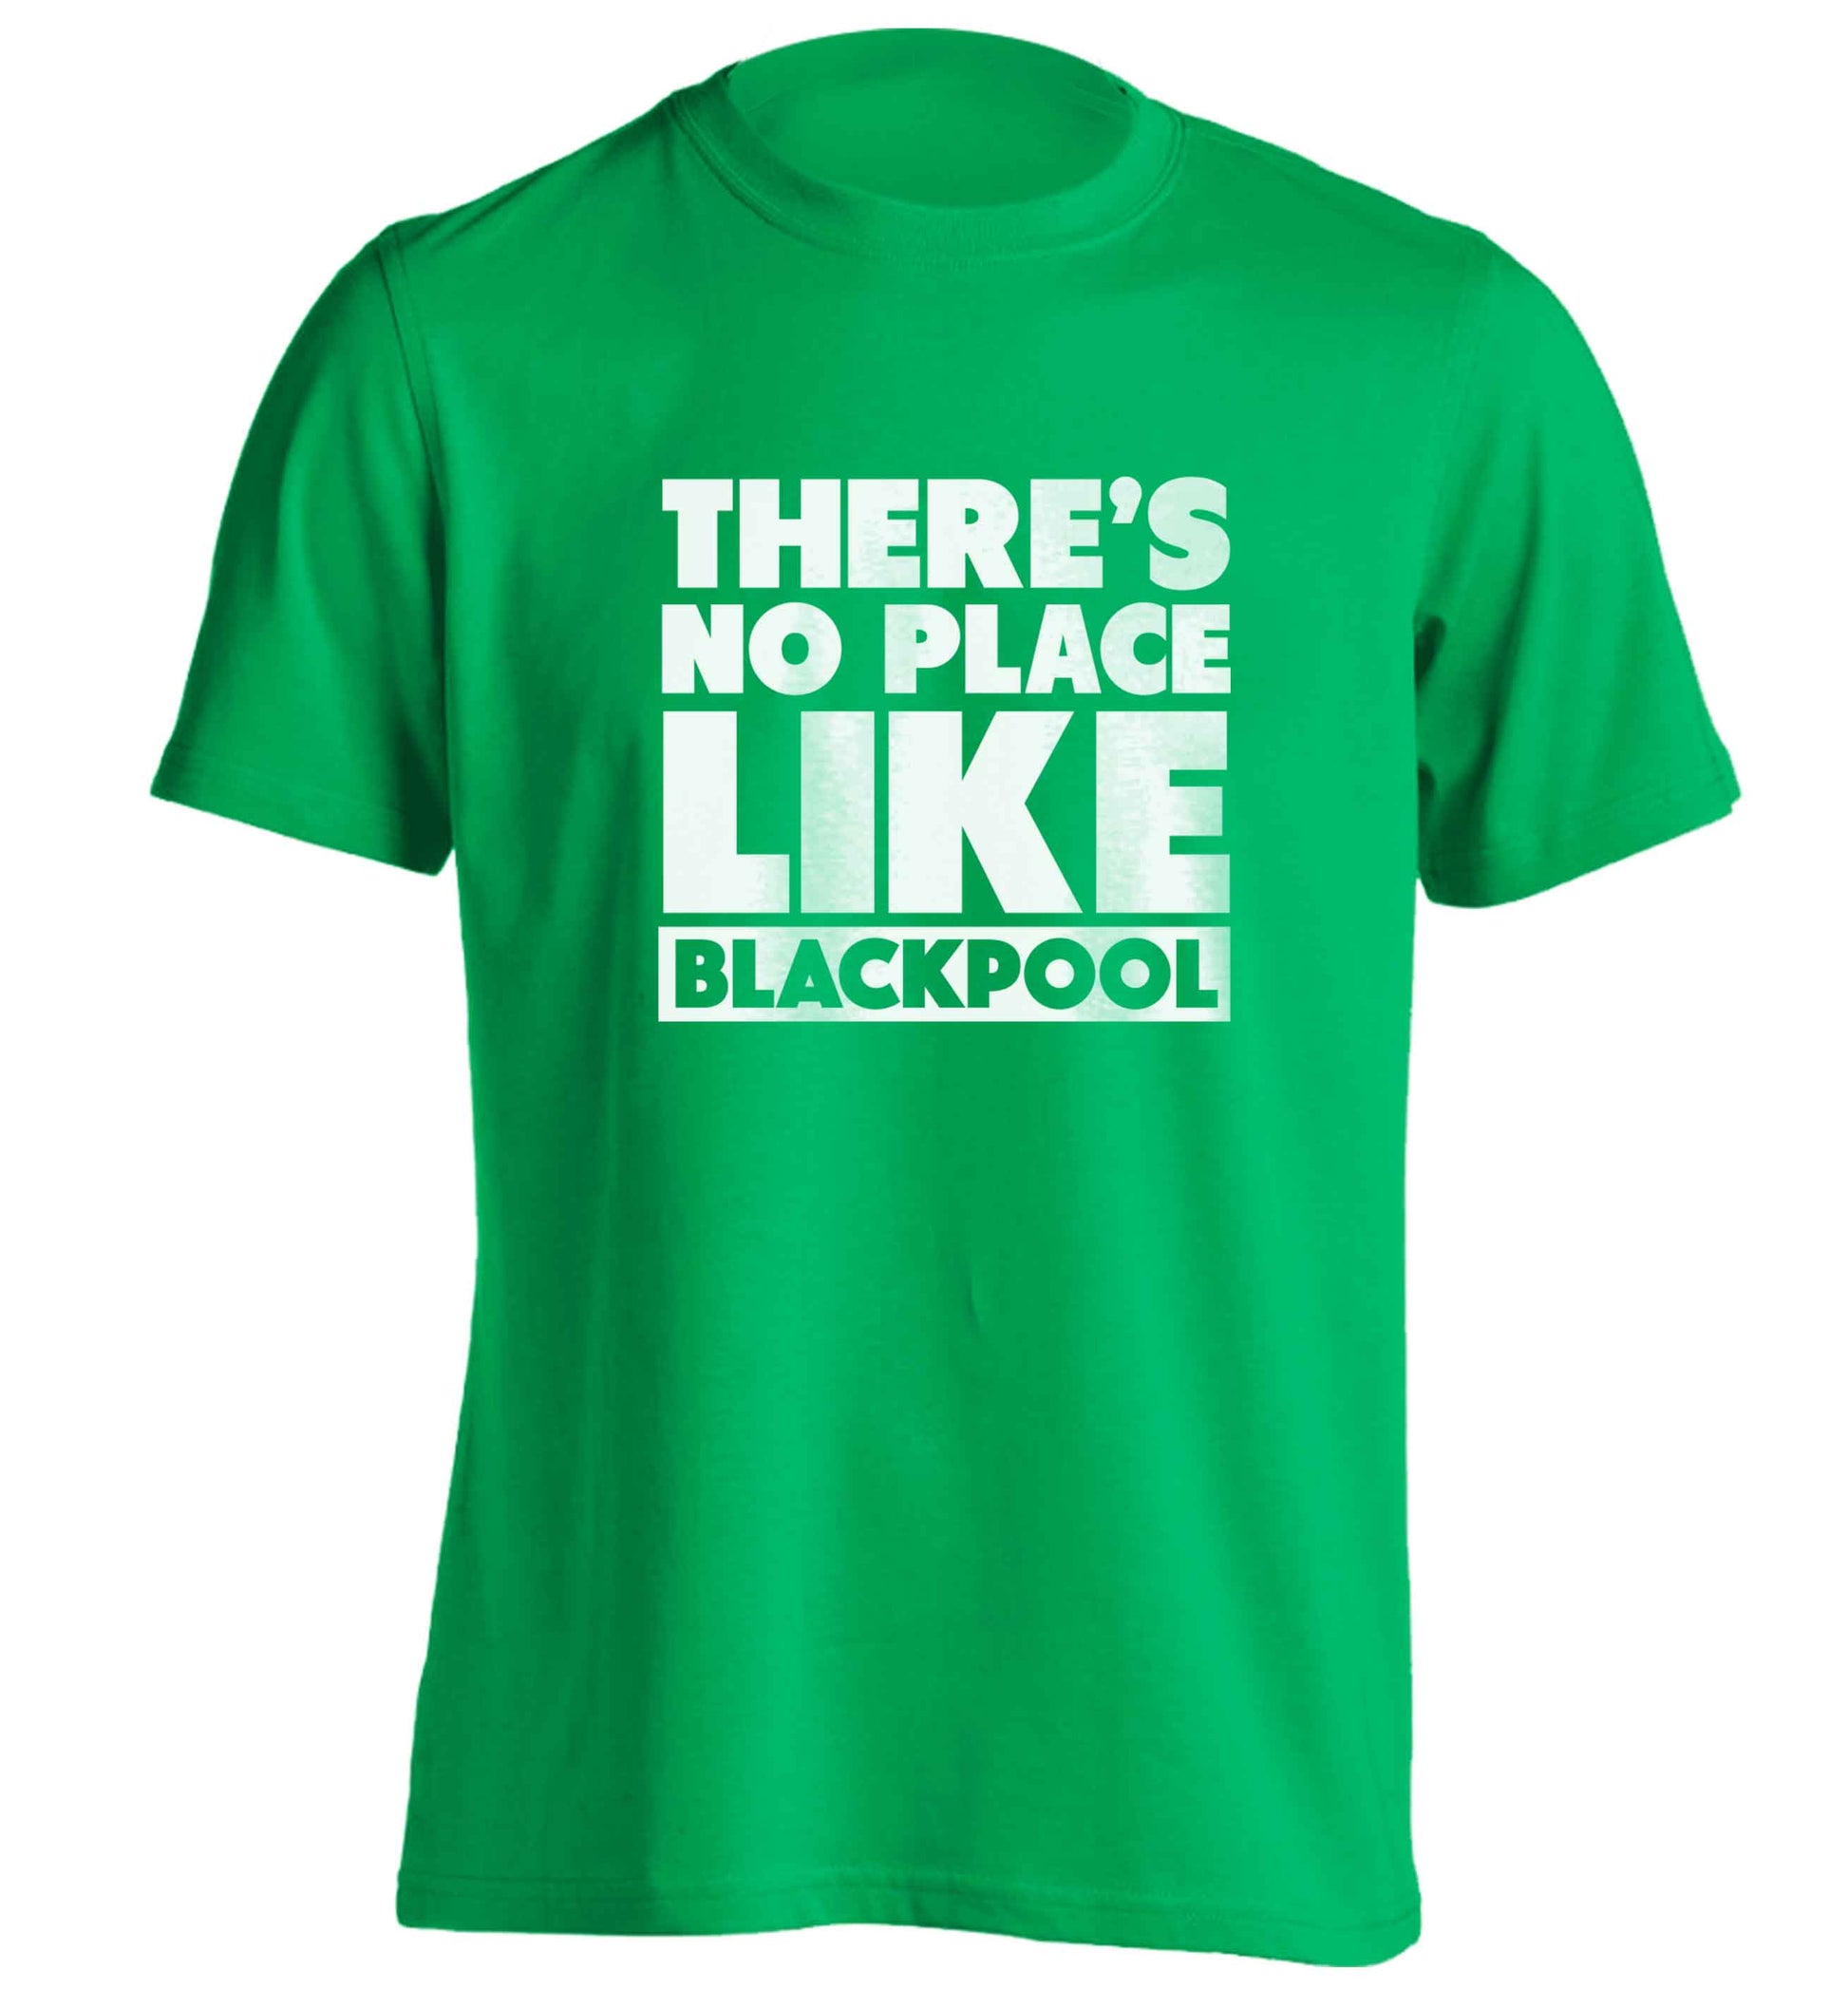 There's no place like Blackpool adults unisex green Tshirt 2XL